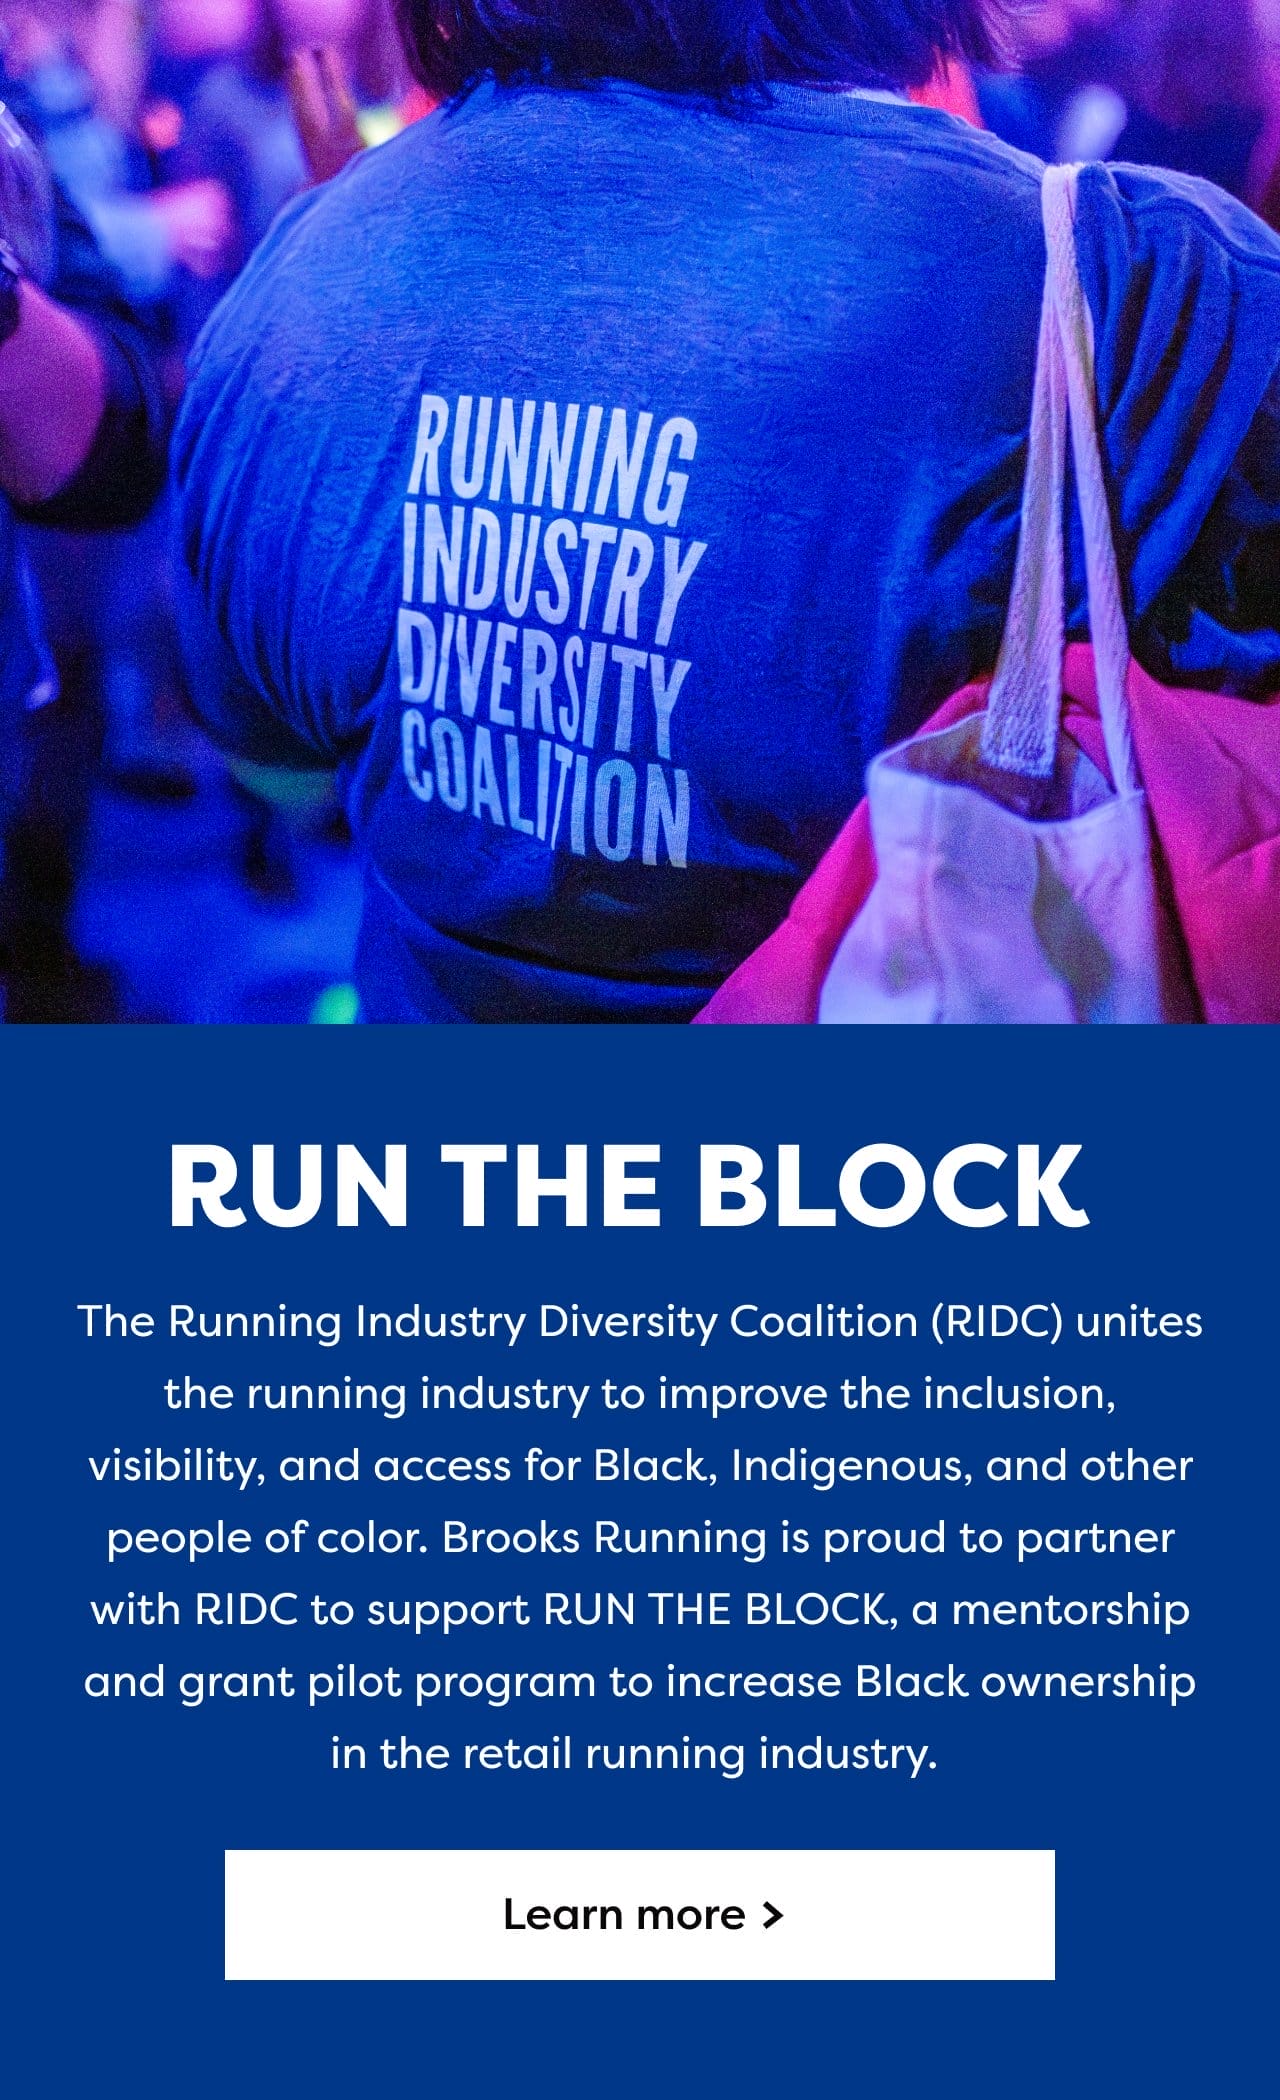 RUN THE BLOCK | The Running Industry Diversity Coalition (RIDC) unites the running industry to improve the inclusion, visibility, and access for Black, Indigenous, and other people of color. Brooks is proud to partner with RIDC and support RUN THE BLOCK, an RIDC mentorship and grant pilot program to increase Black ownership in the retail running industry. | Learn more